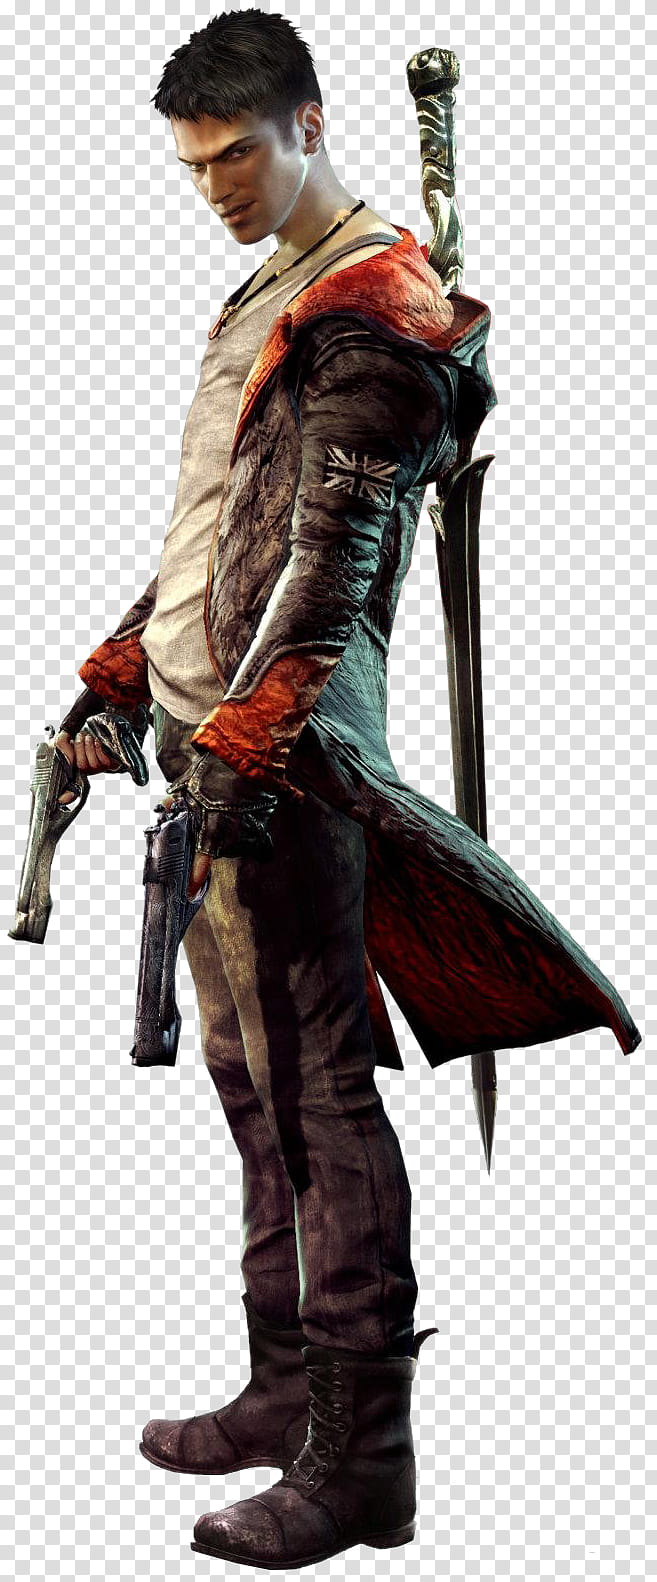 DmC Devil May Cry RENDER , male character with pistols and sword illustration transparent background PNG clipart